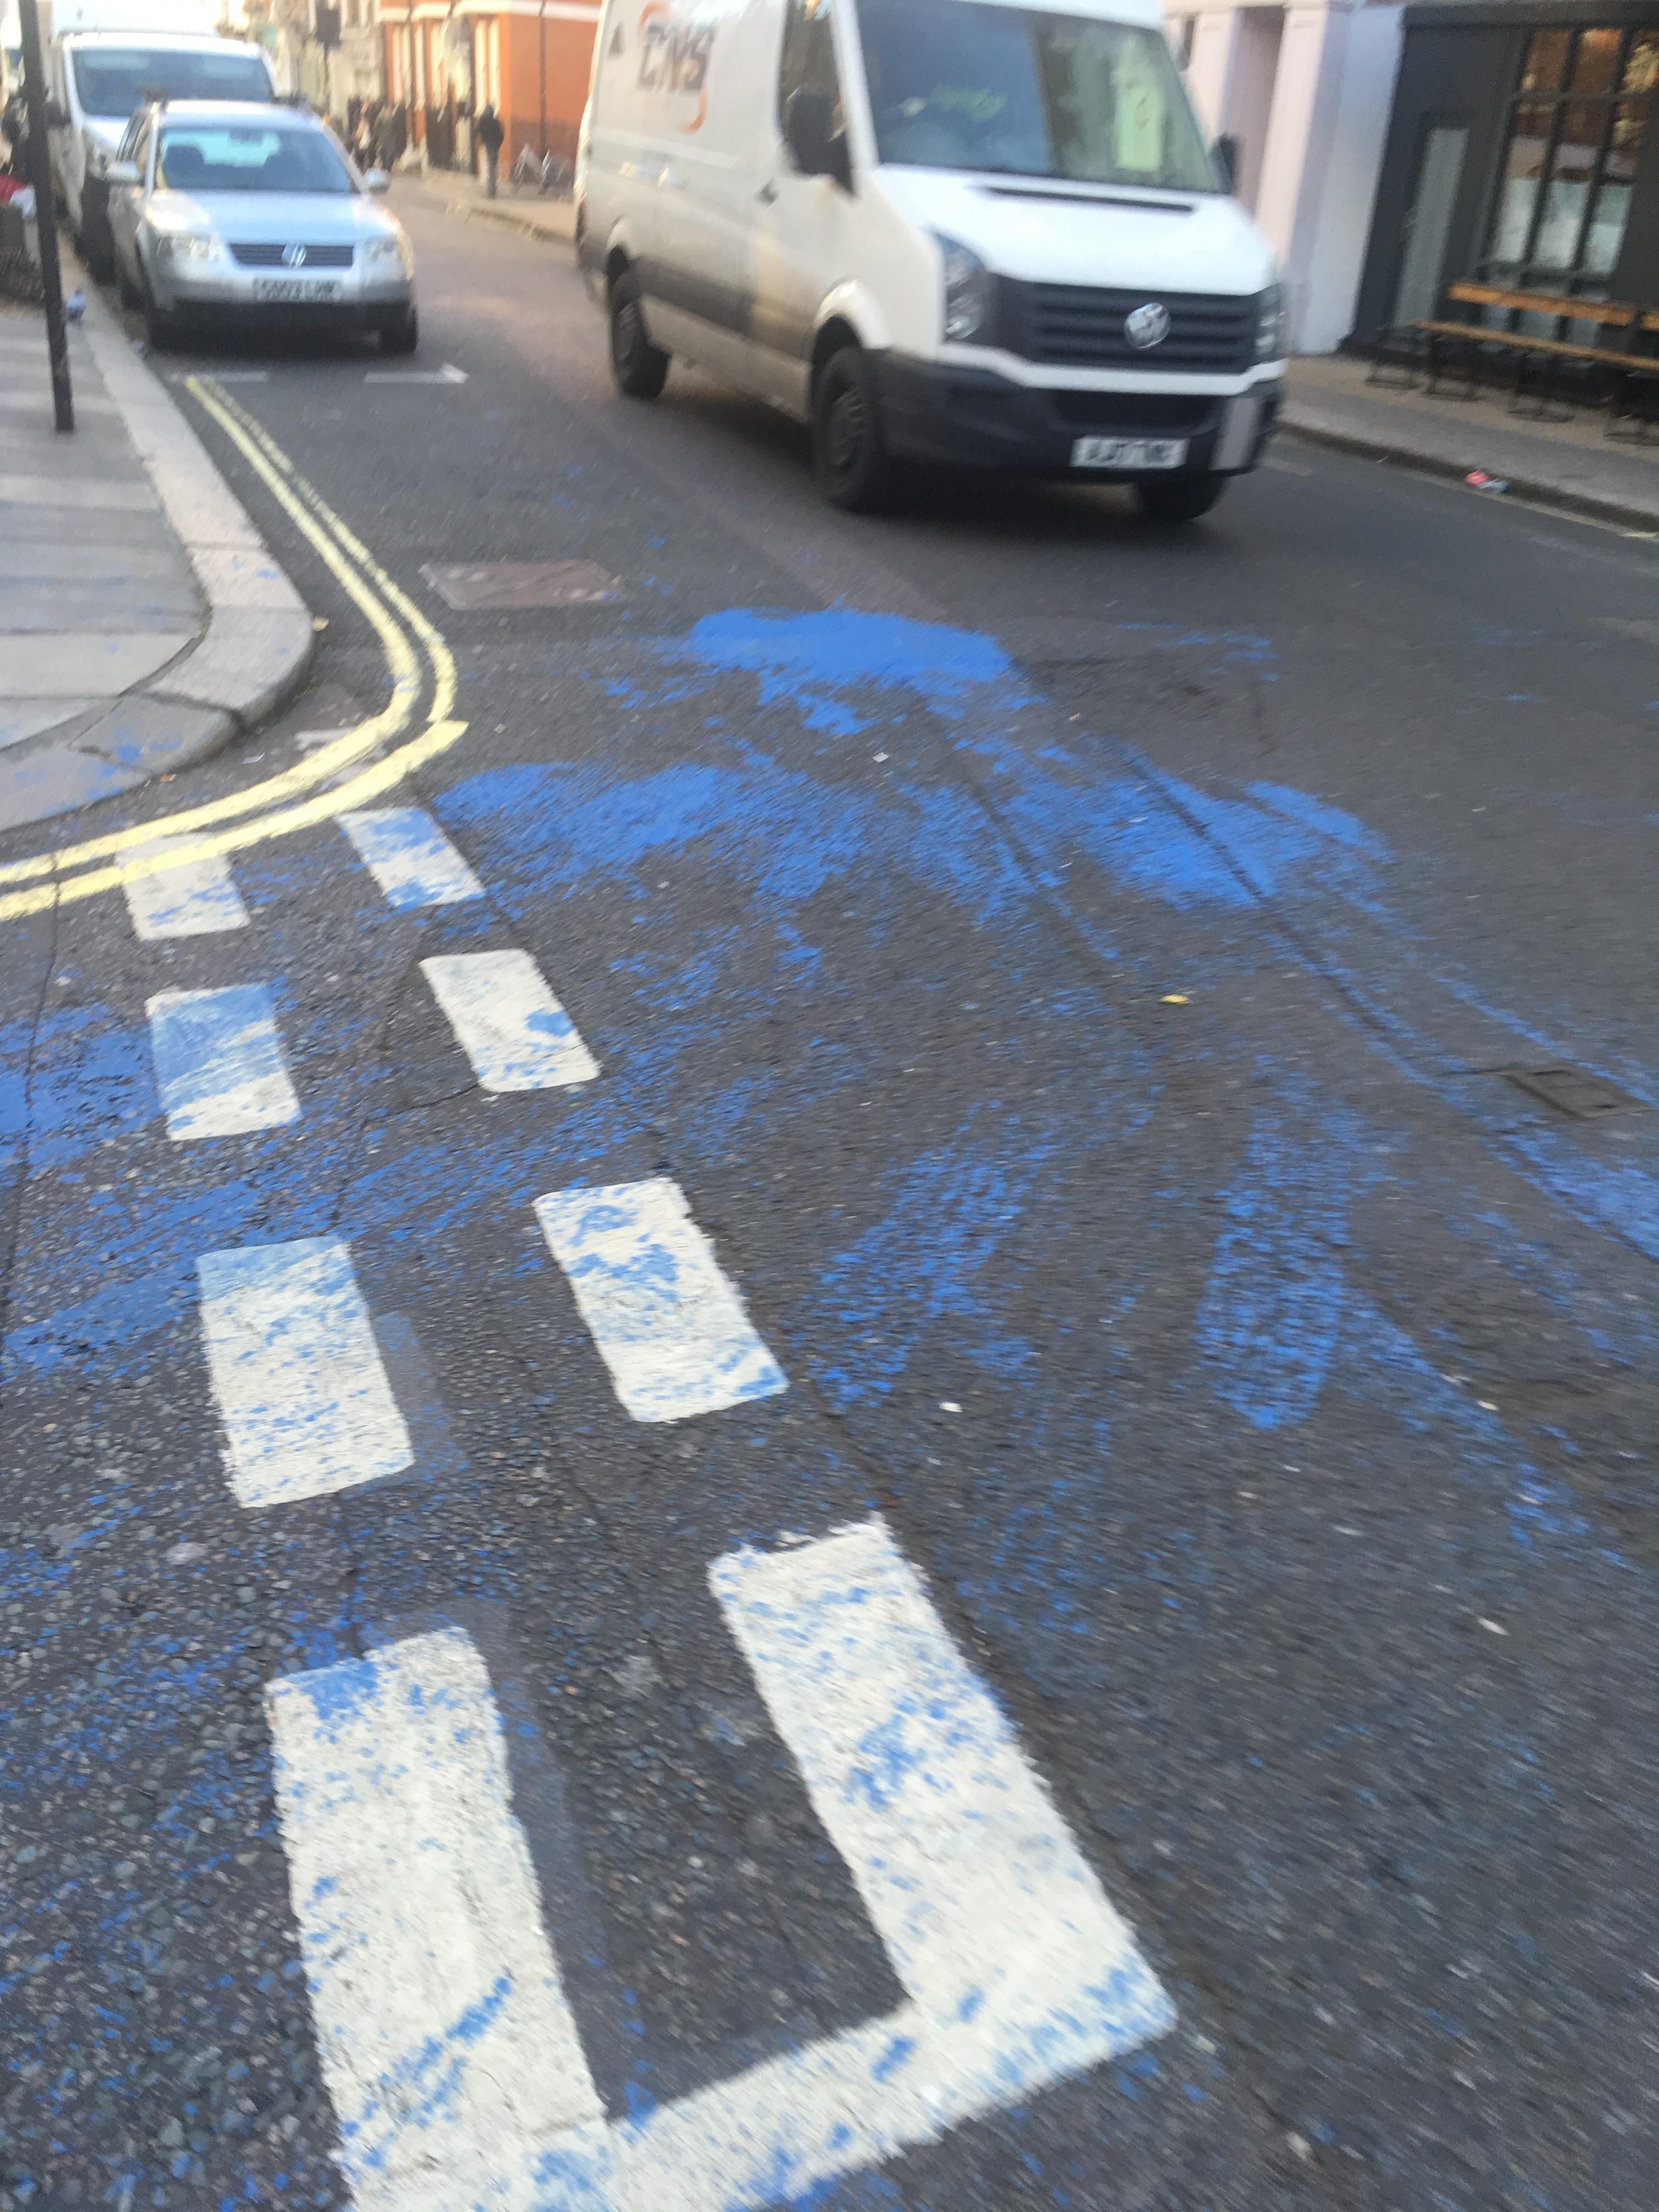 Smurf killed in hit and run in central London today.